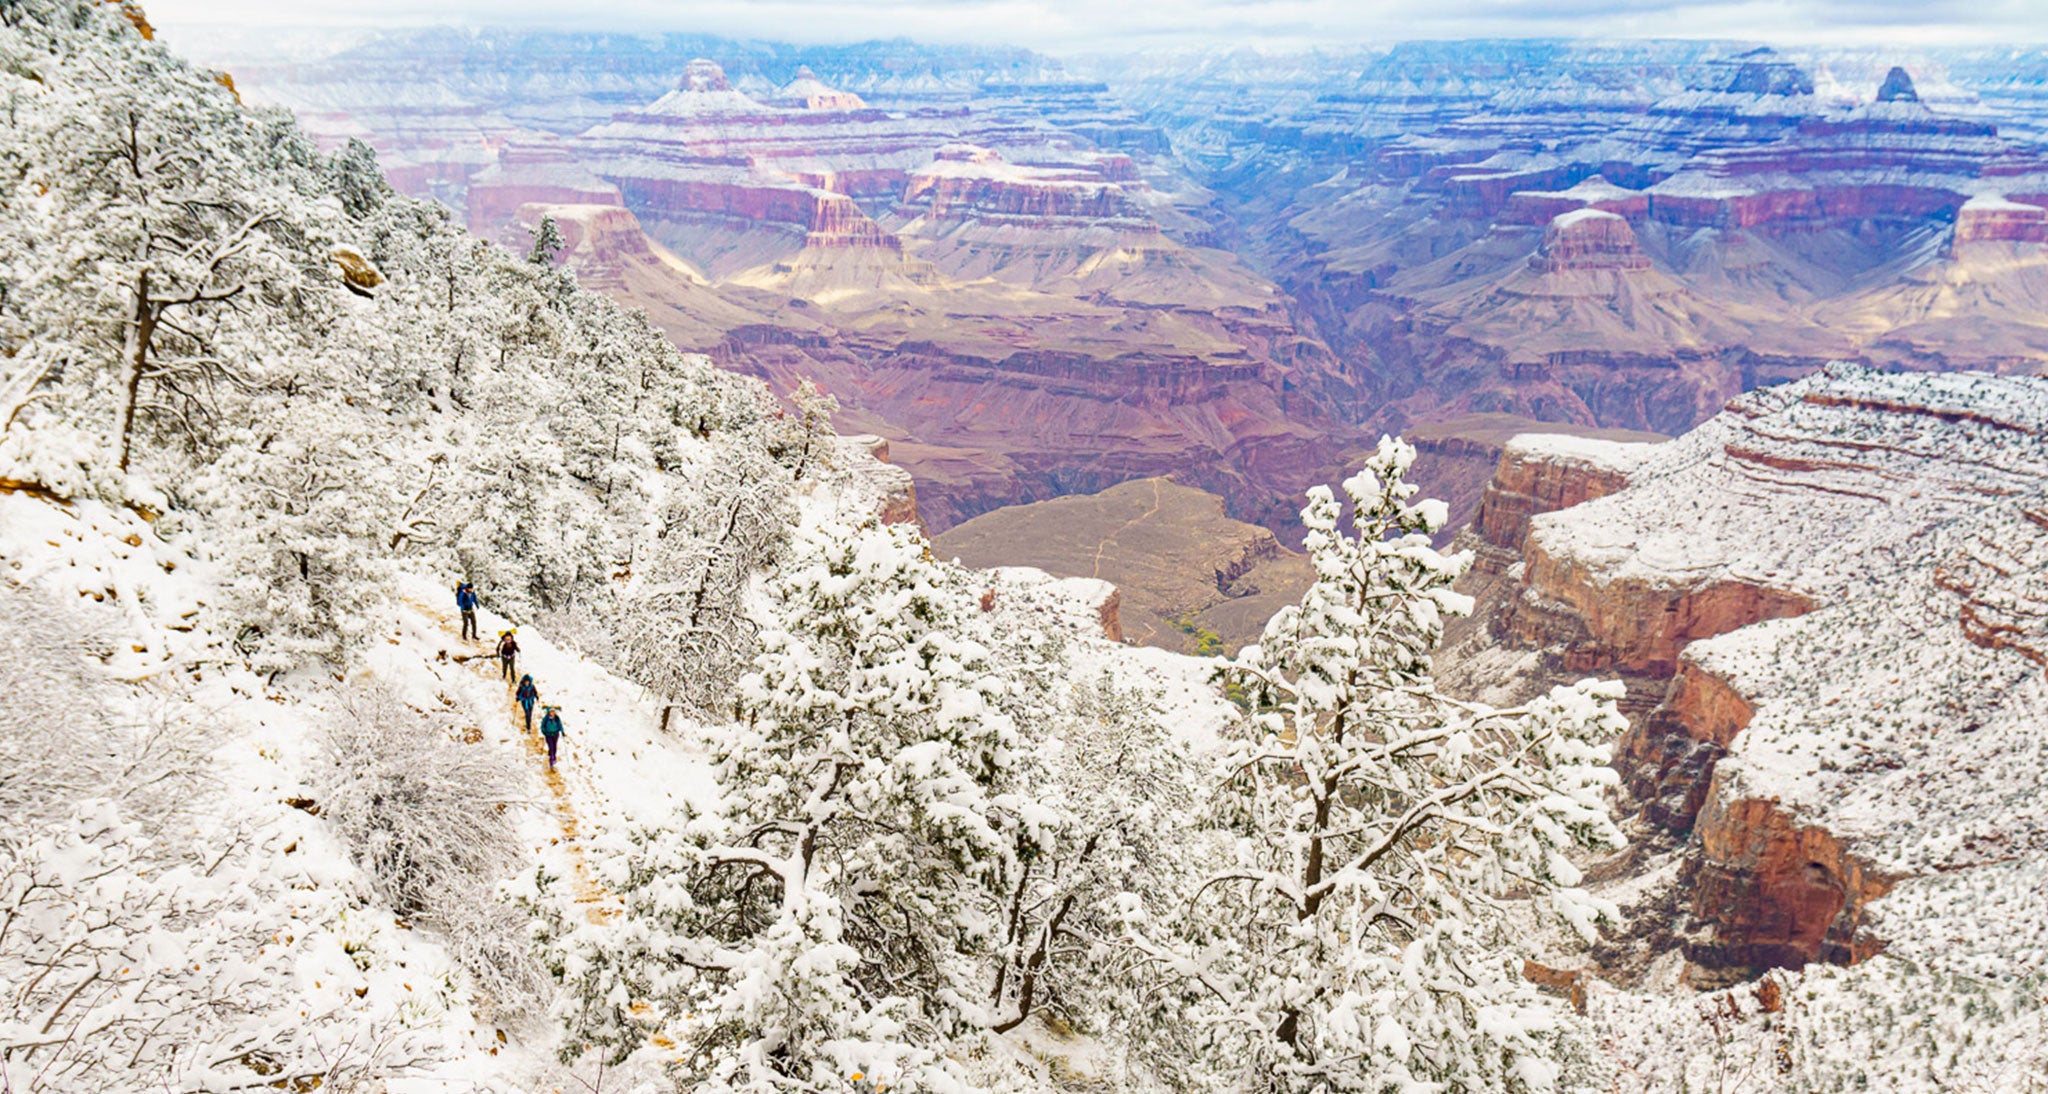 Four backpackers descend Bright Angel Trail in Grand Canyon National Park just below the rim.  An early winter Pacific cold front brought 5-6